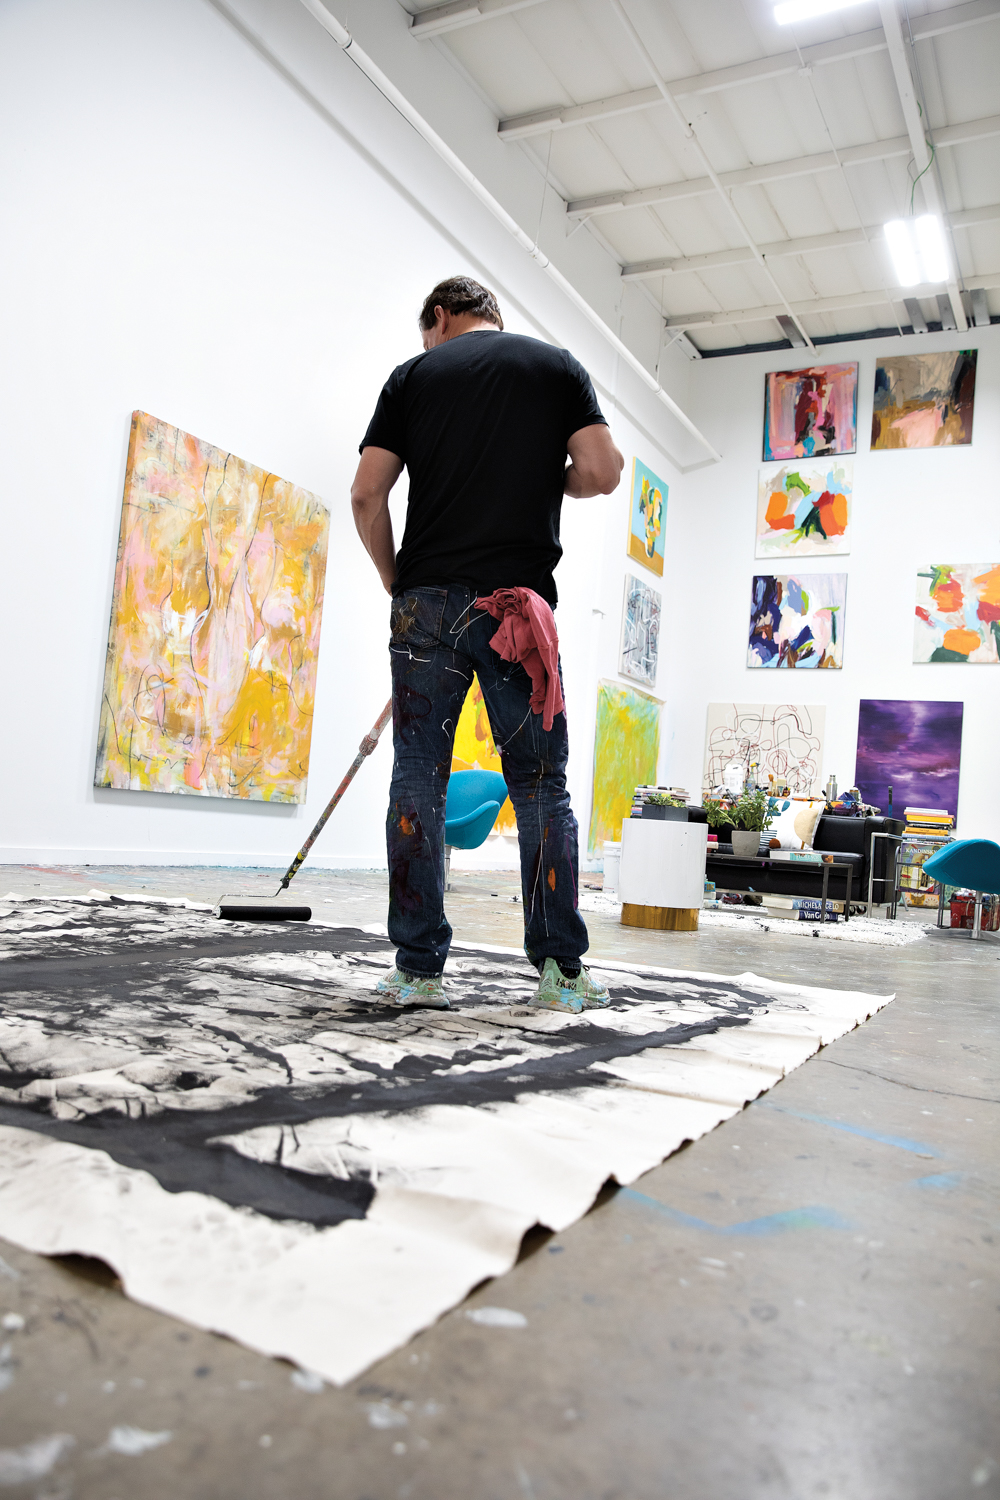 artist standing and using a broom to move paint around on a canvas lying on the floor